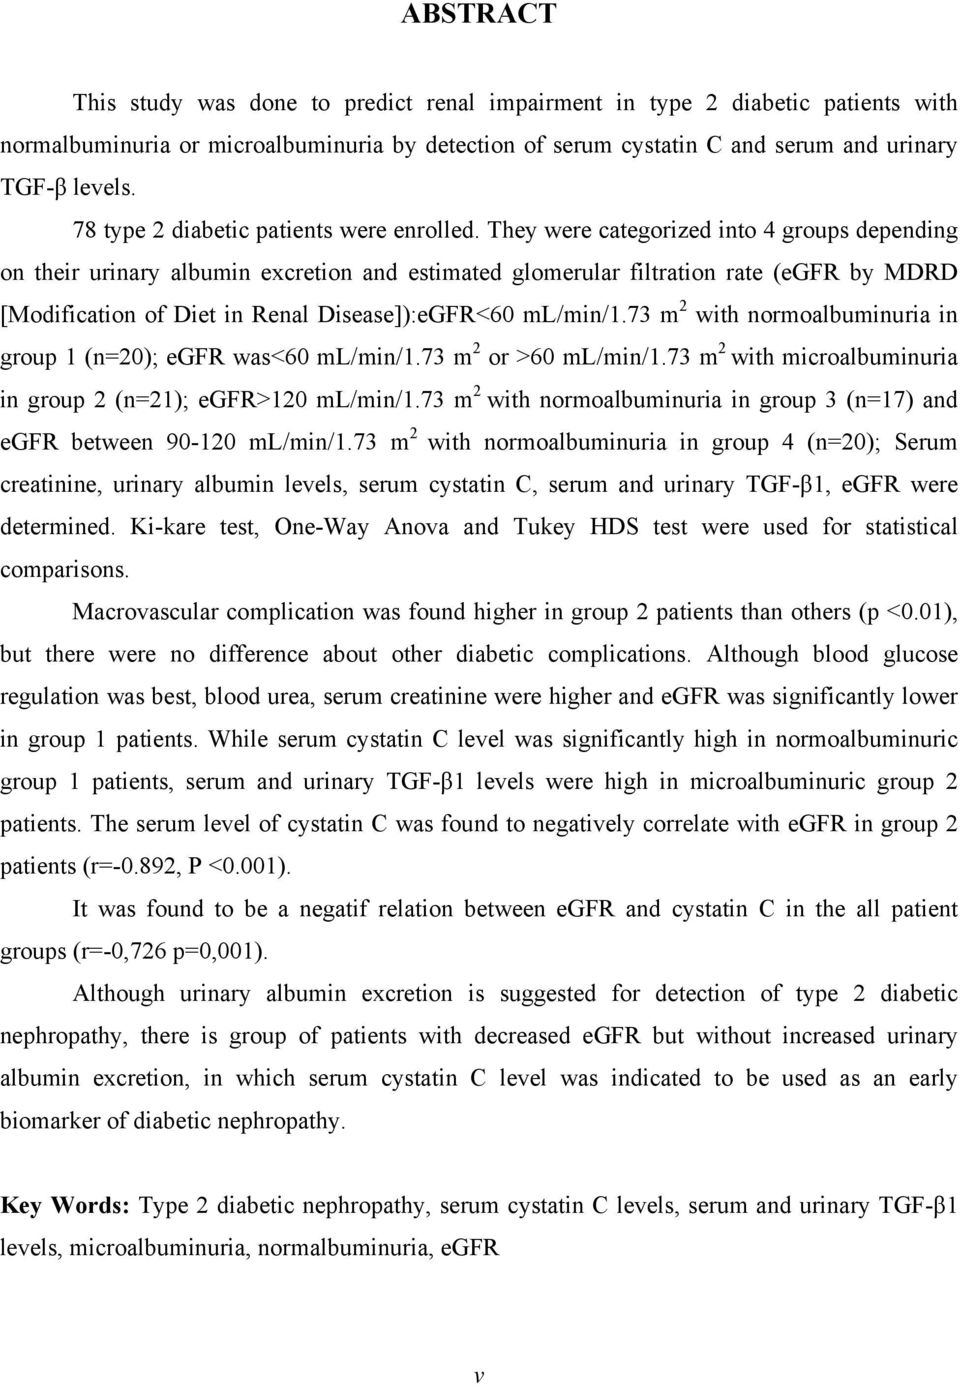 They were categorized into 4 groups depending on their urinary albumin excretion and estimated glomerular filtration rate (egfr by MDRD [Modification of Diet in Renal Disease]):eGFR<60 ml/min/1.